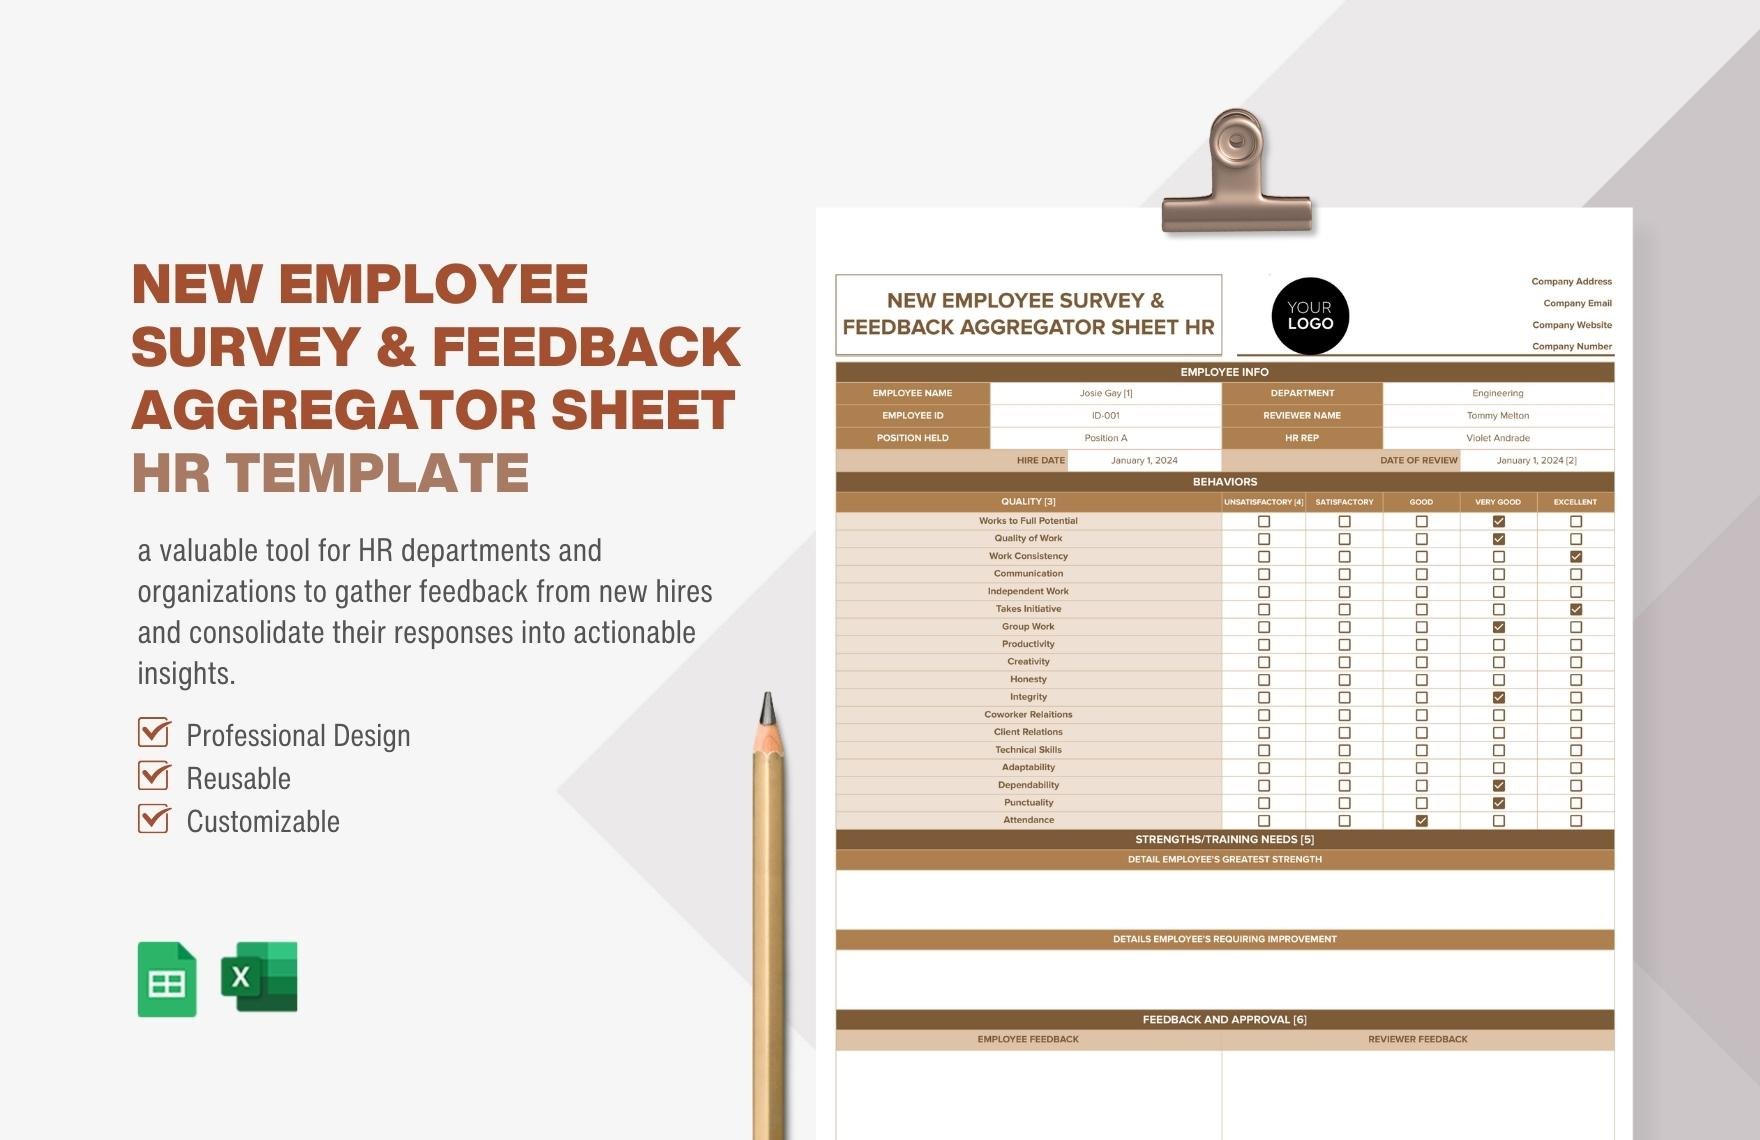 New Employee Survey & Feedback Aggregator Sheet HR Template in Excel, Google Sheets